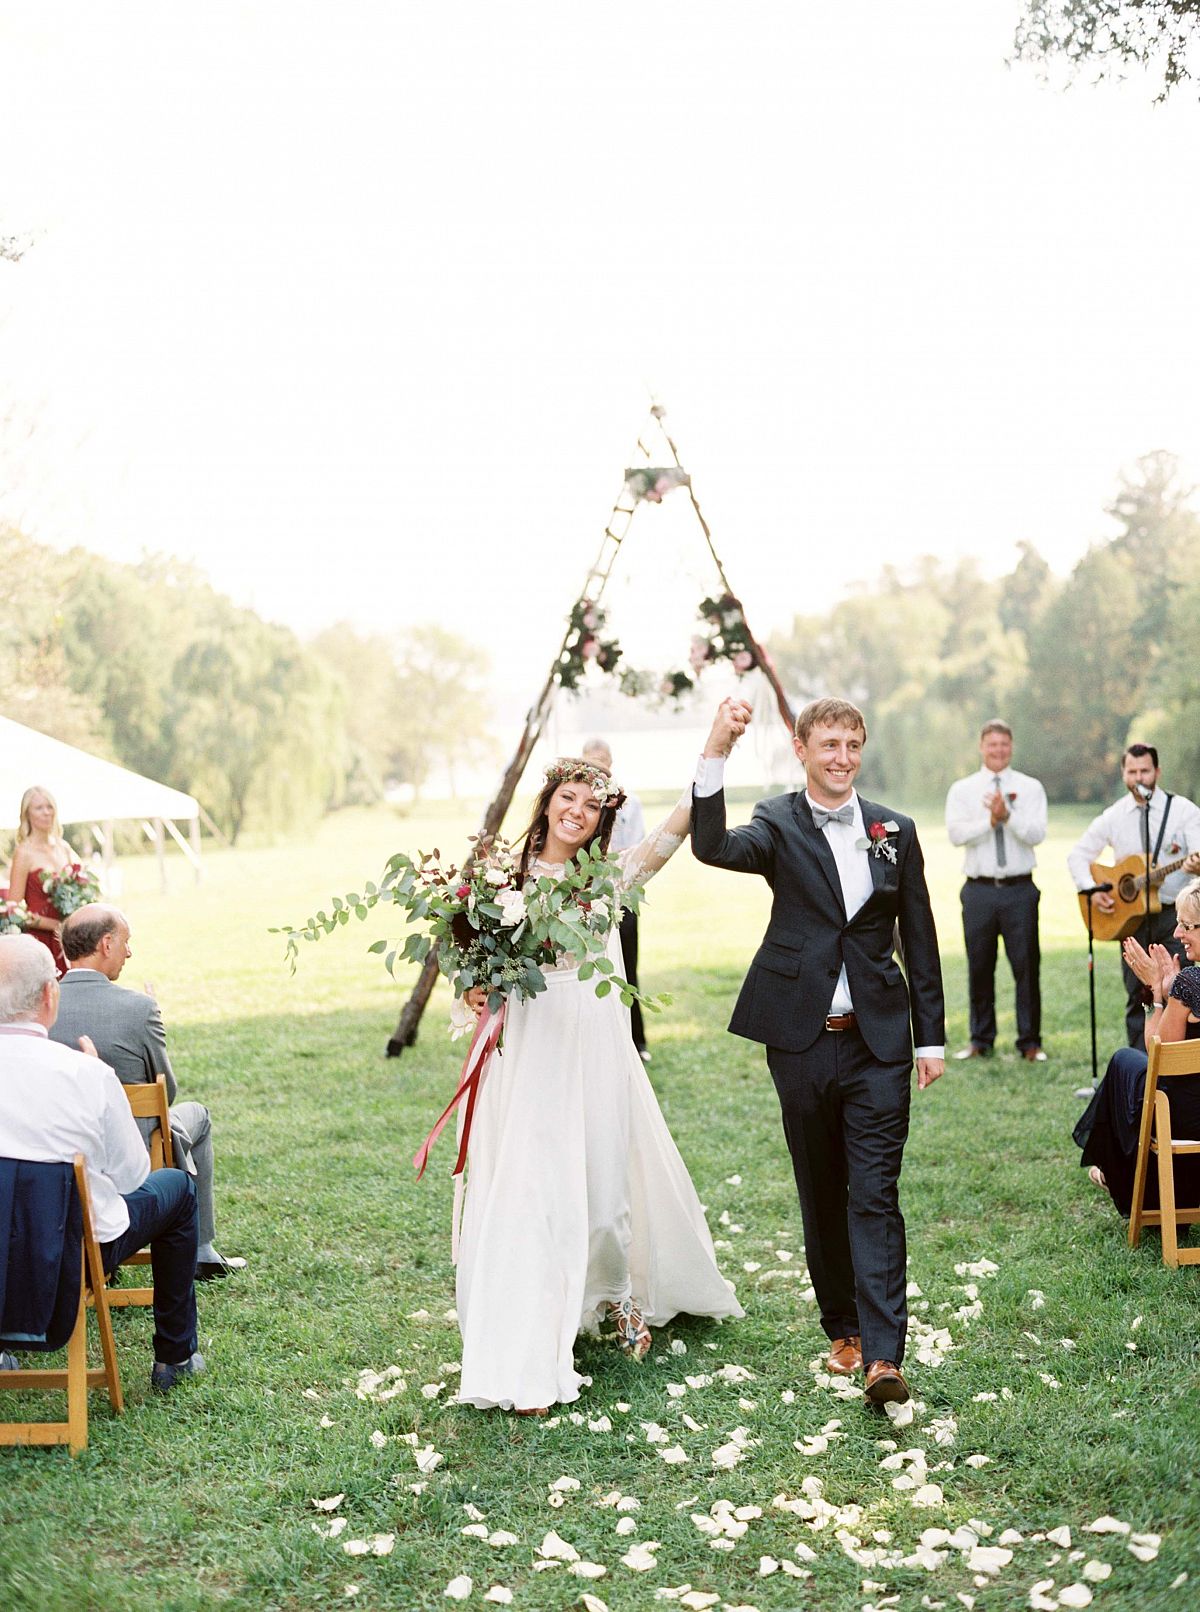 Anne-Claire and Chad's Luxe Bohemian Outdoor Wedding